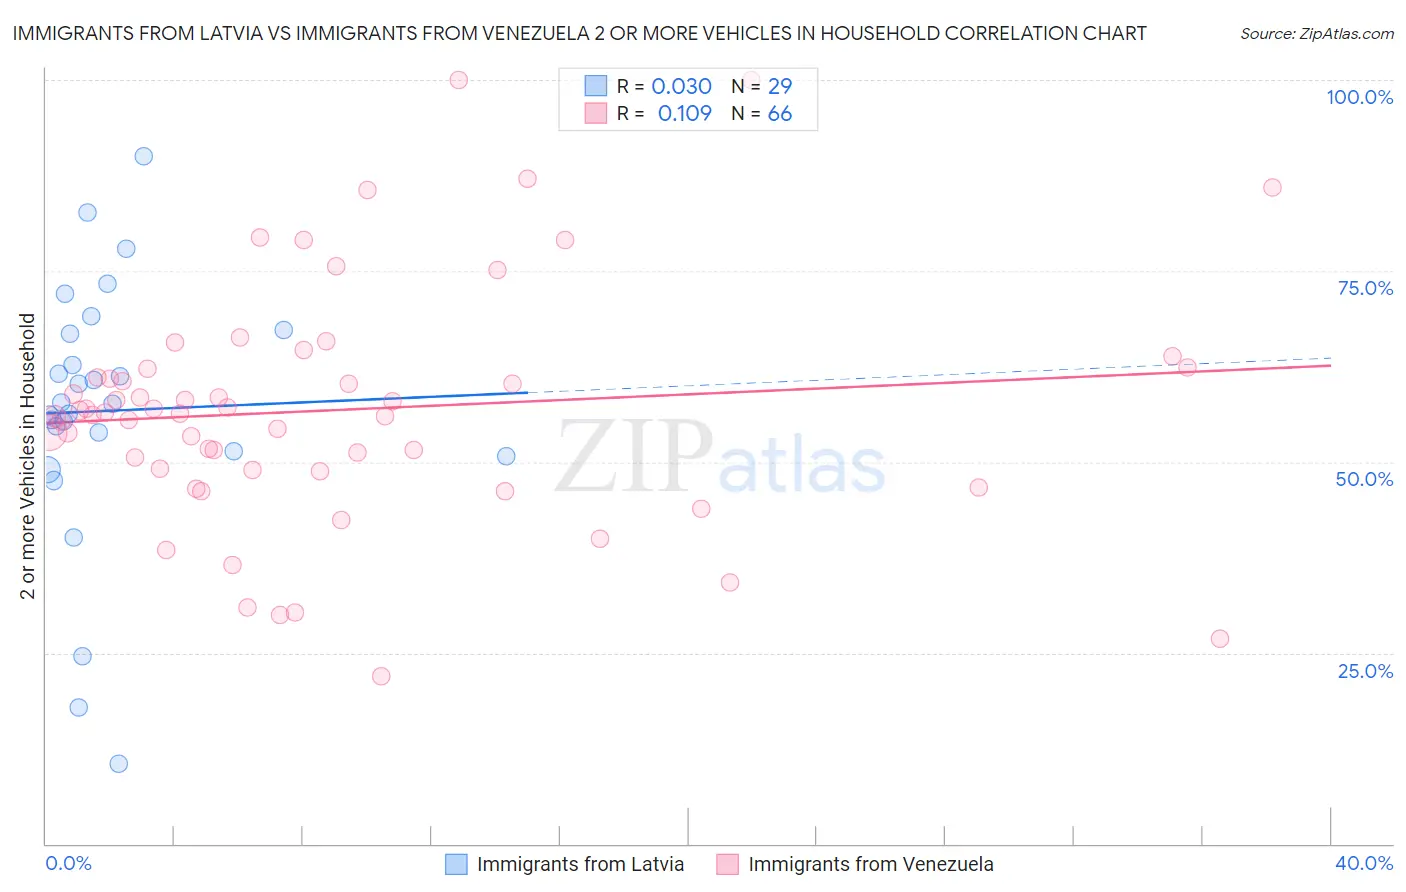 Immigrants from Latvia vs Immigrants from Venezuela 2 or more Vehicles in Household